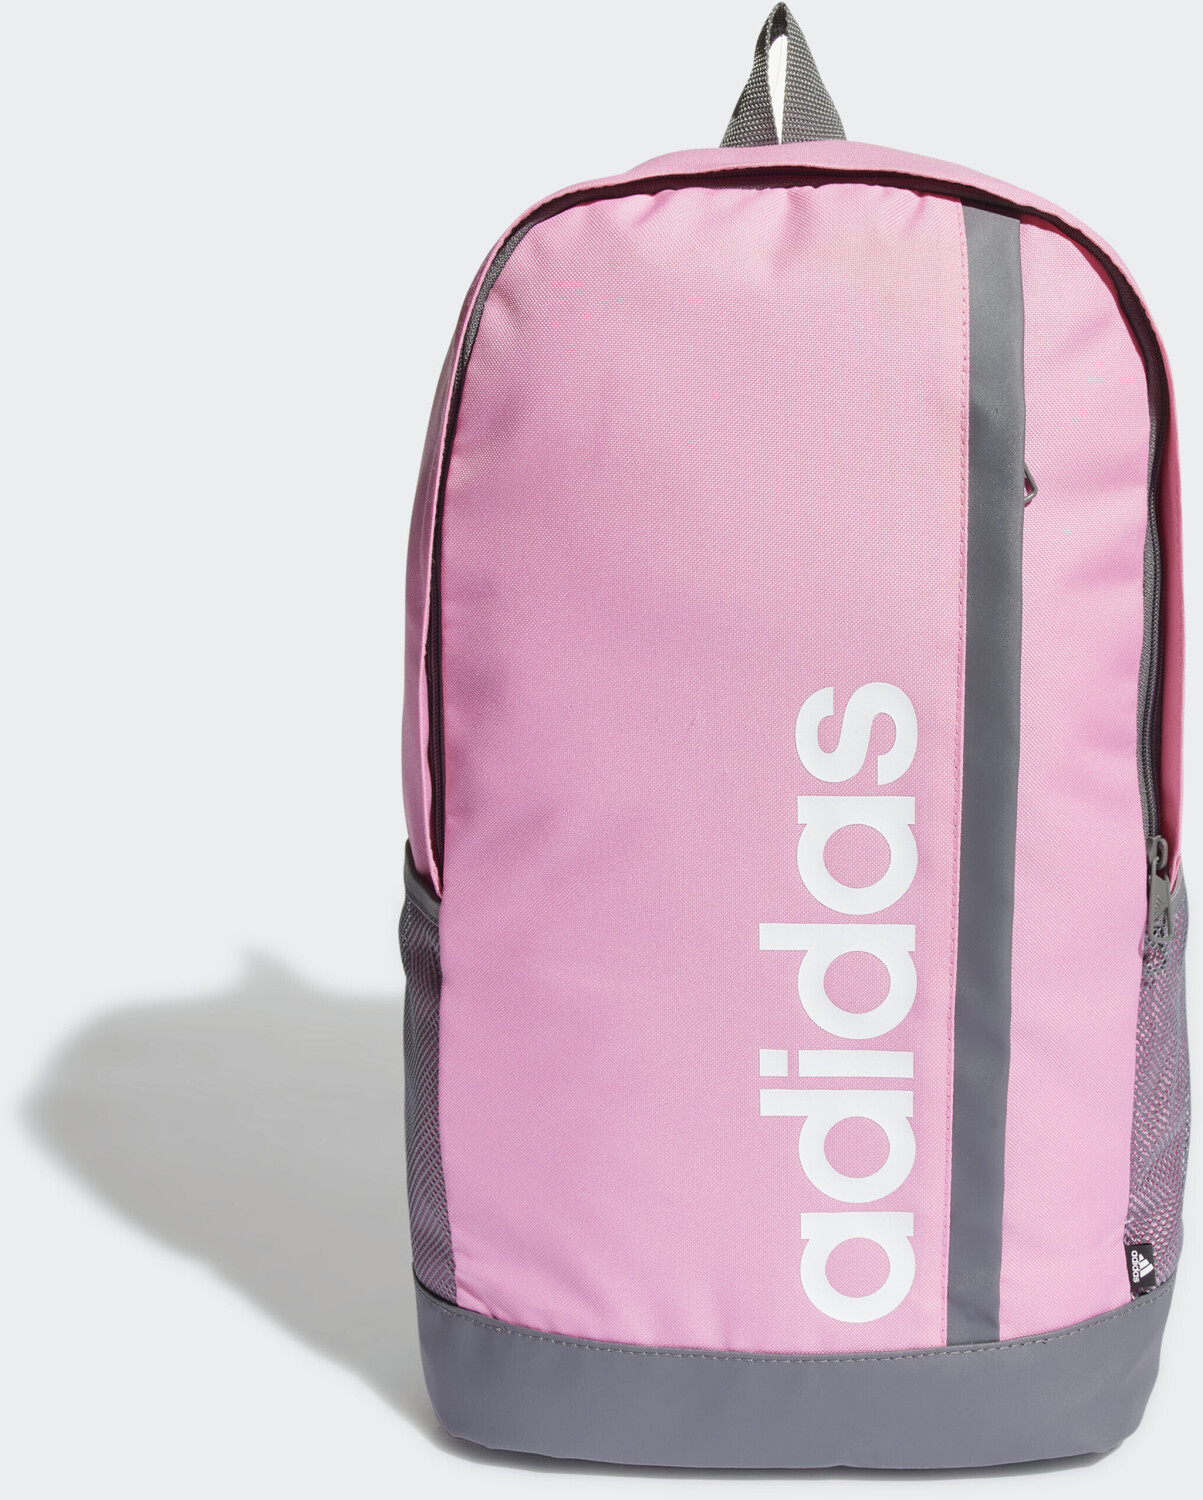 Adidas Essentials Logo Backpack bliss pink/grey four/white (HM9110) desde 17,08 € | Compara en idealo